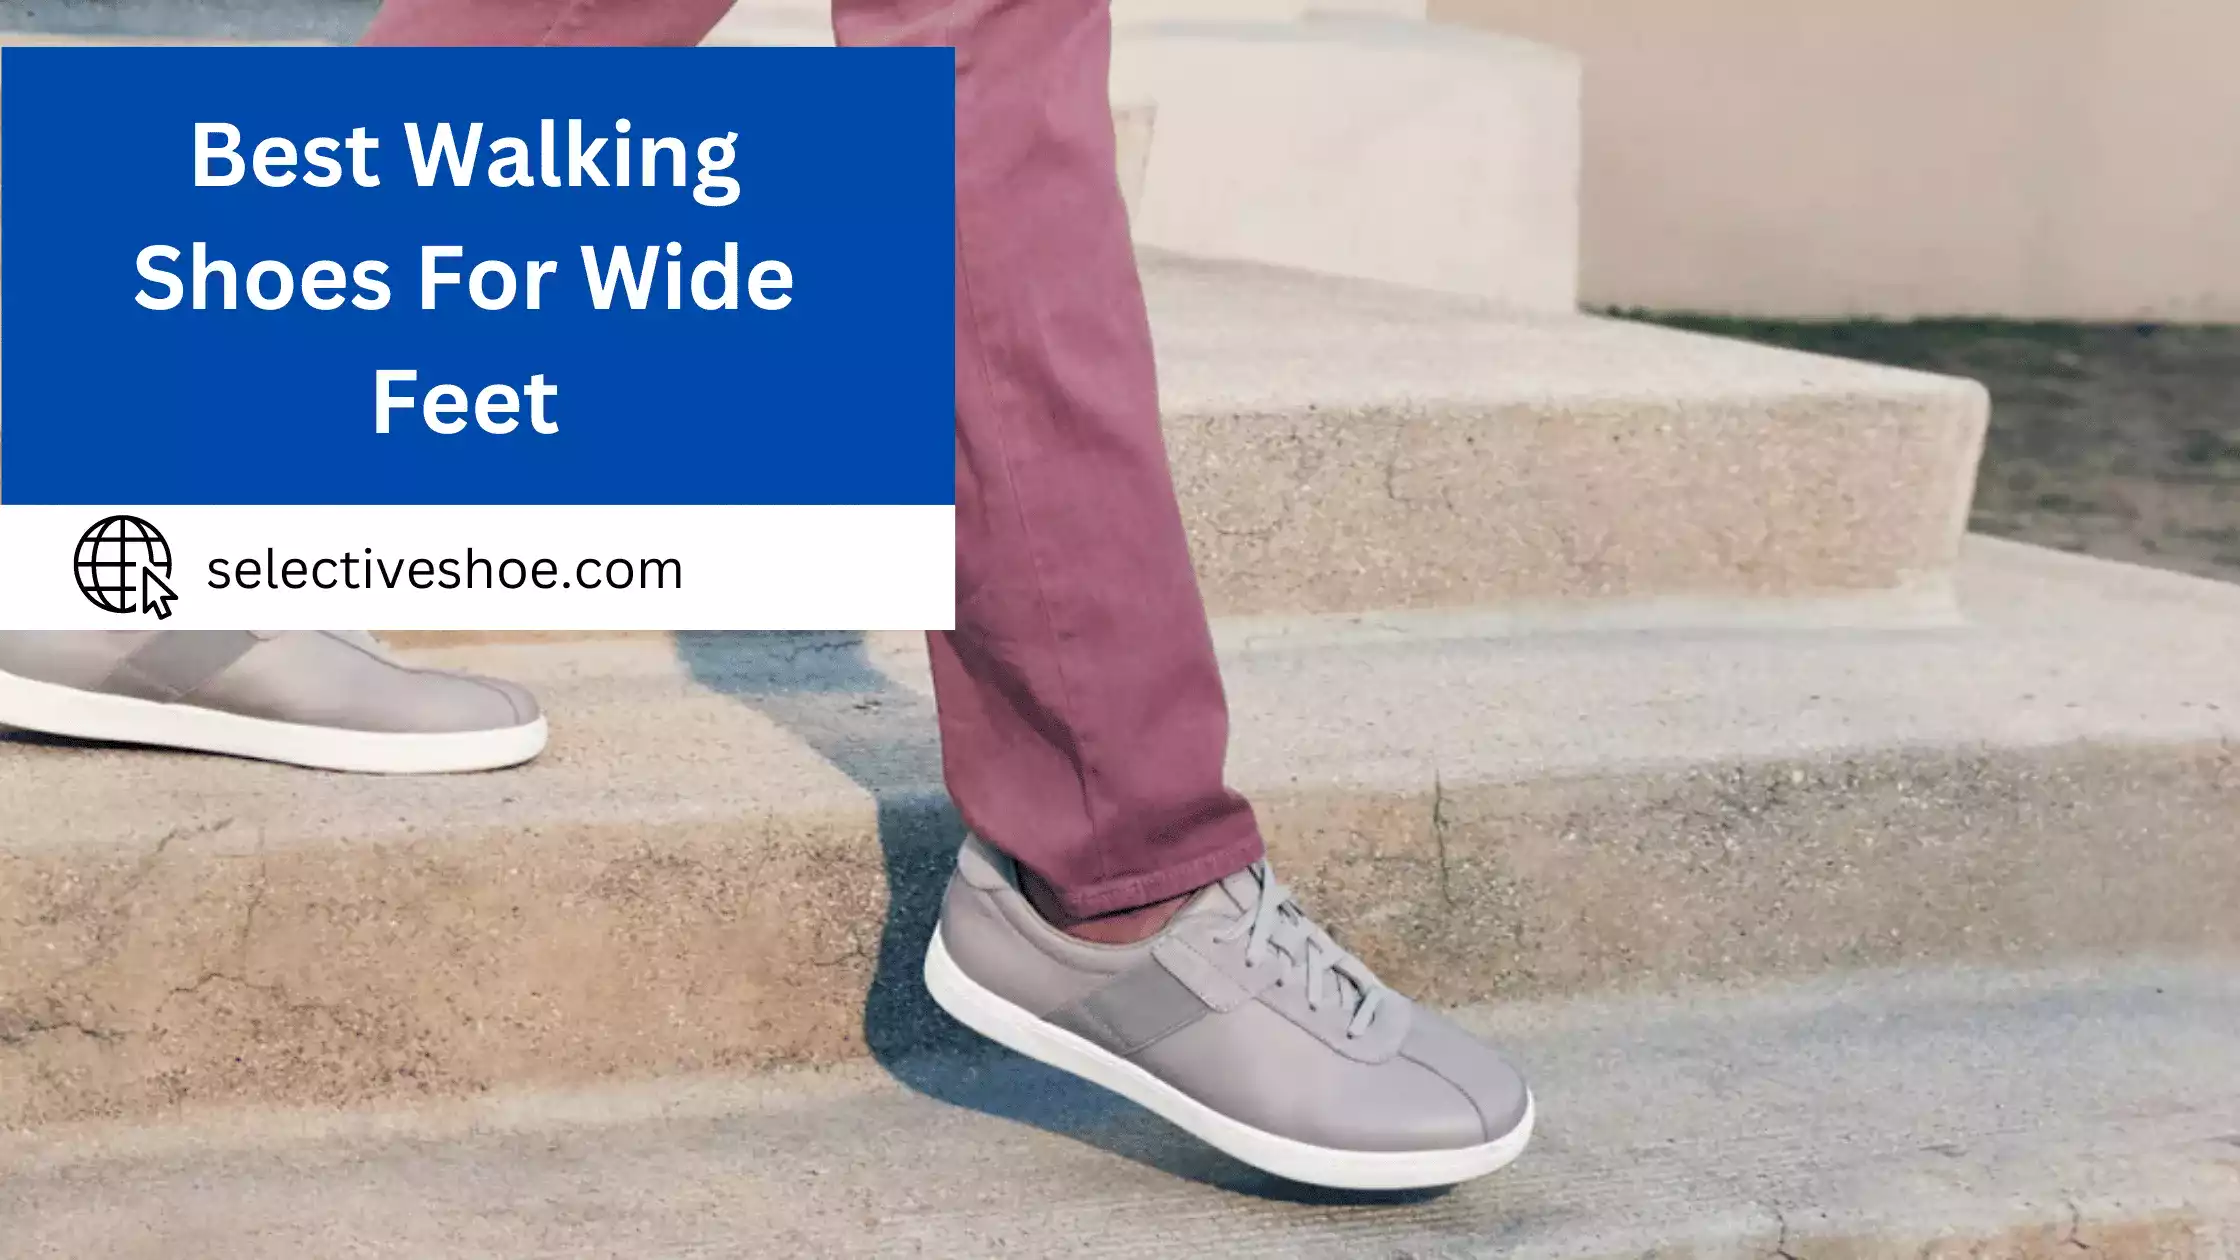 Best Walking Shoes For Wide Feet - Expert Choice